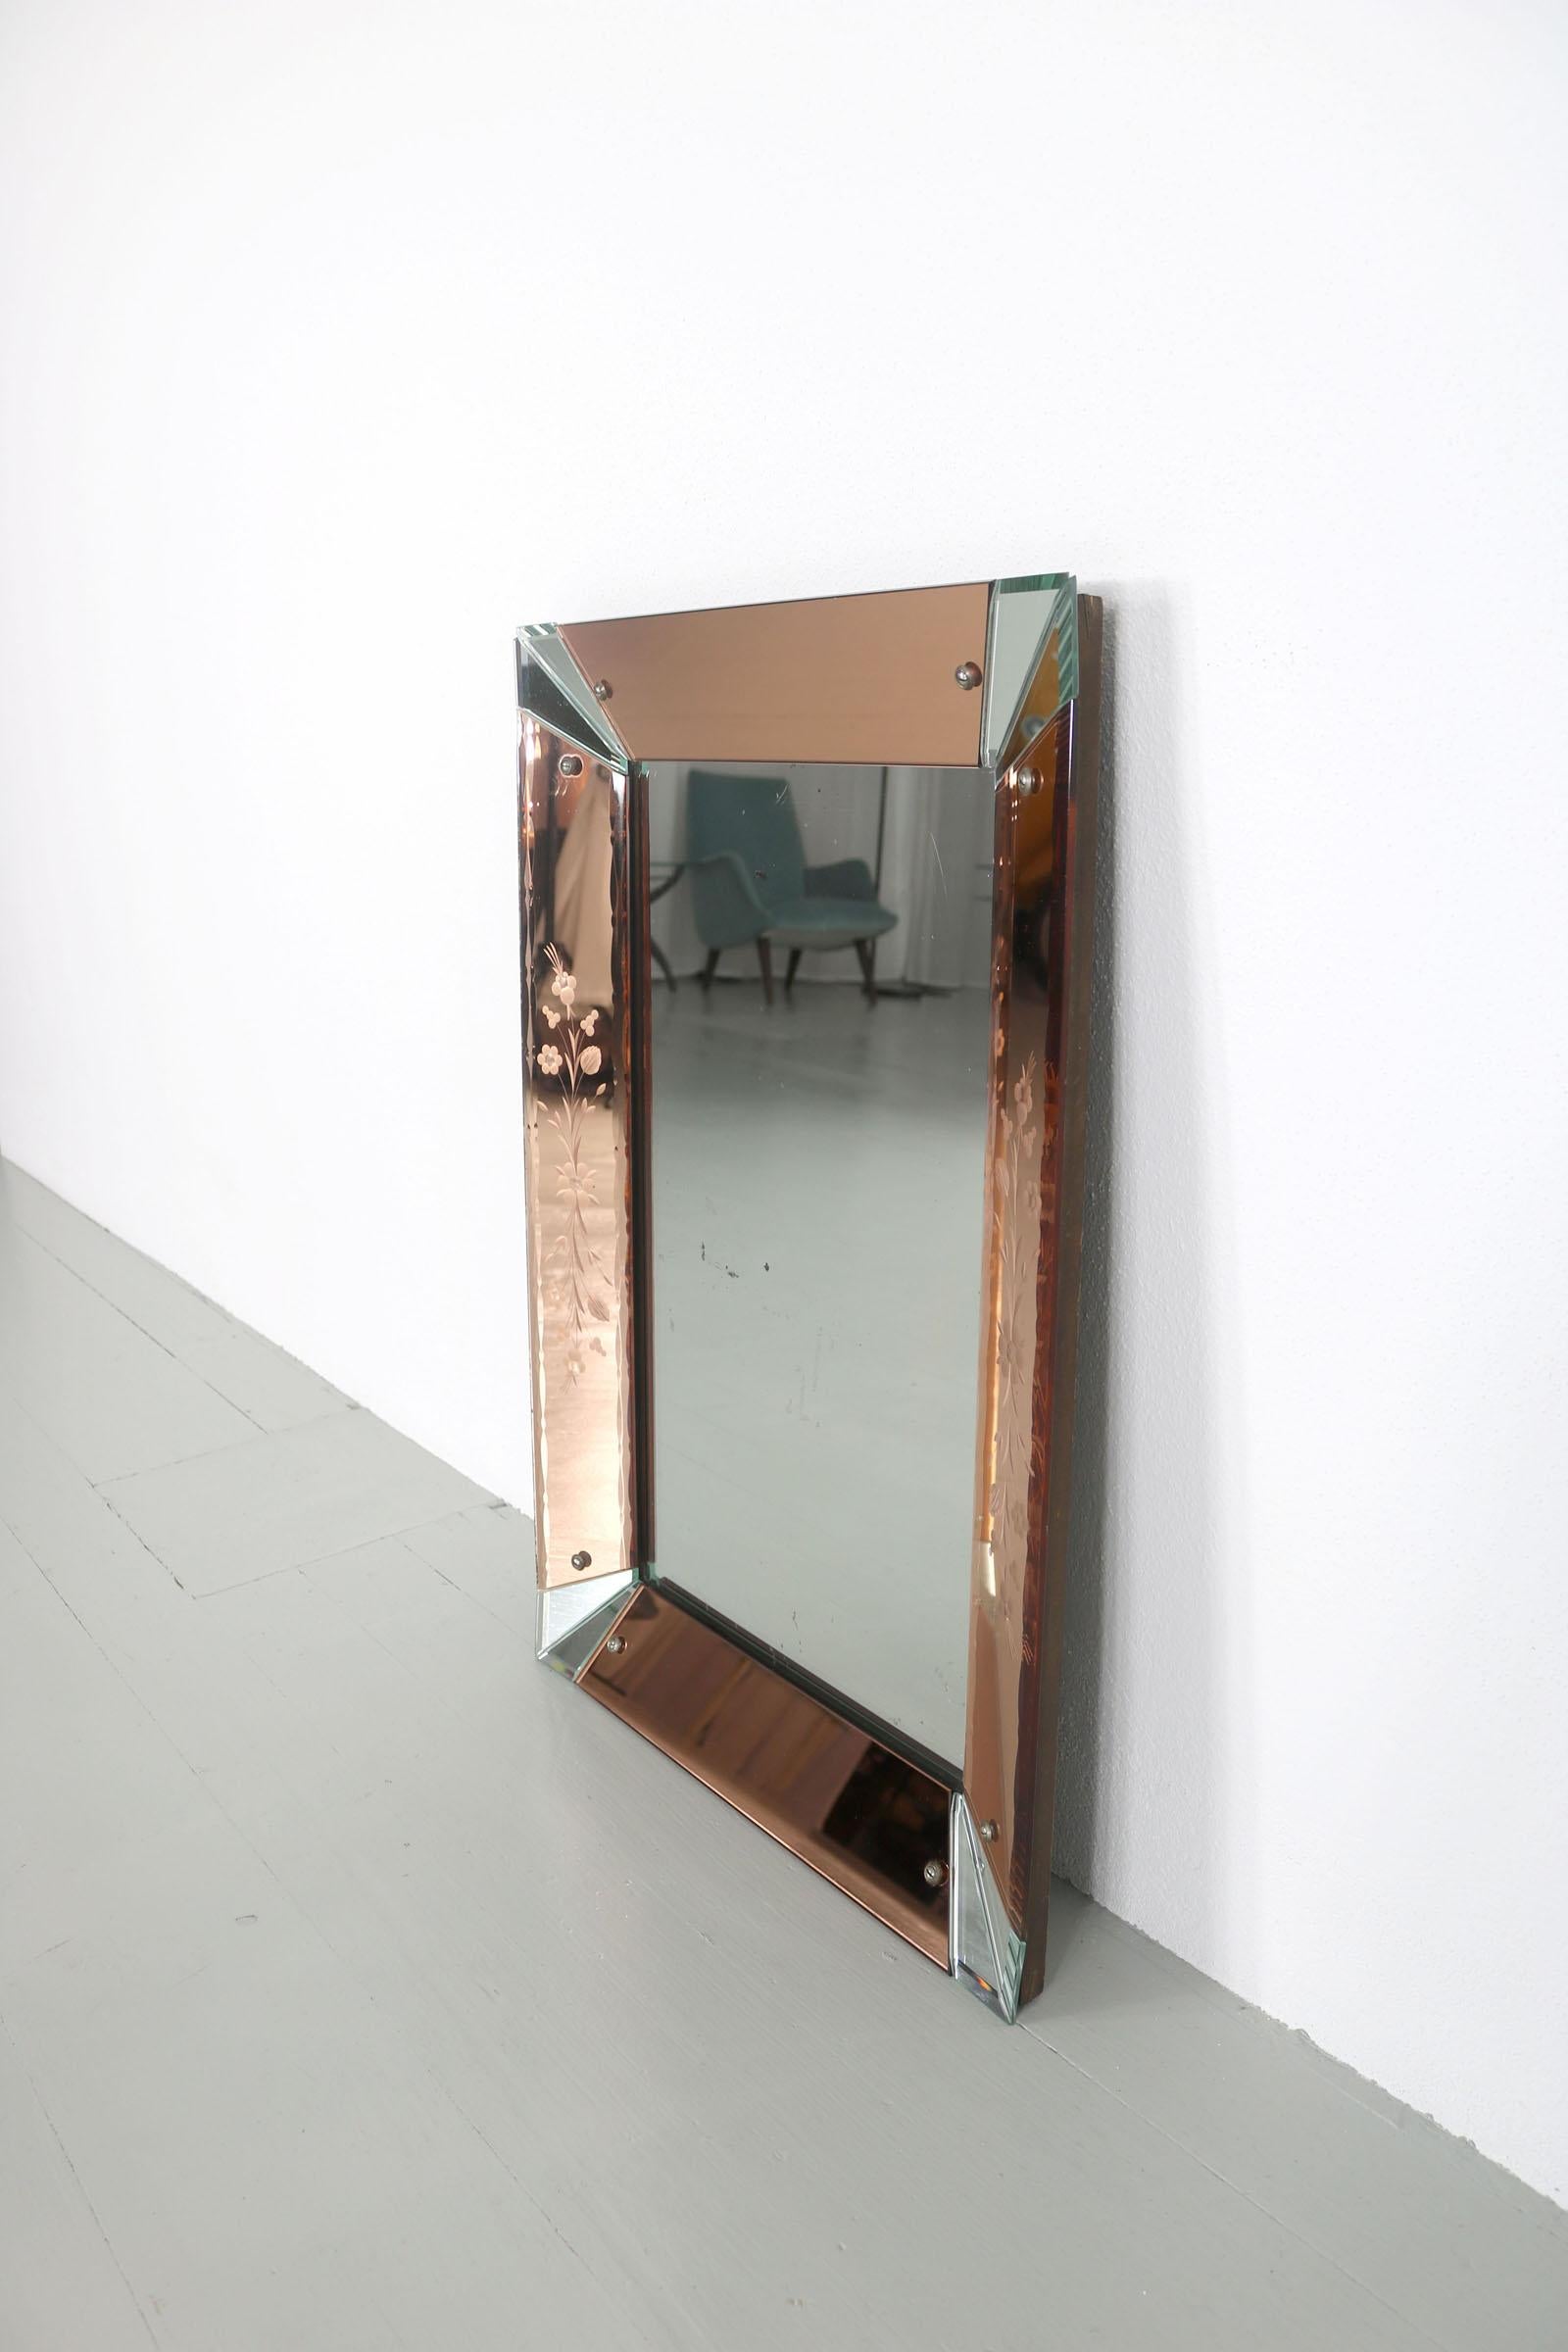 This rectangular mirror has a mirror glass frame on the outer edge of the mirror. The corners are glassy-transparent and the areas in between are made of old rose colored glass that has engravings in the form of floral patterns.